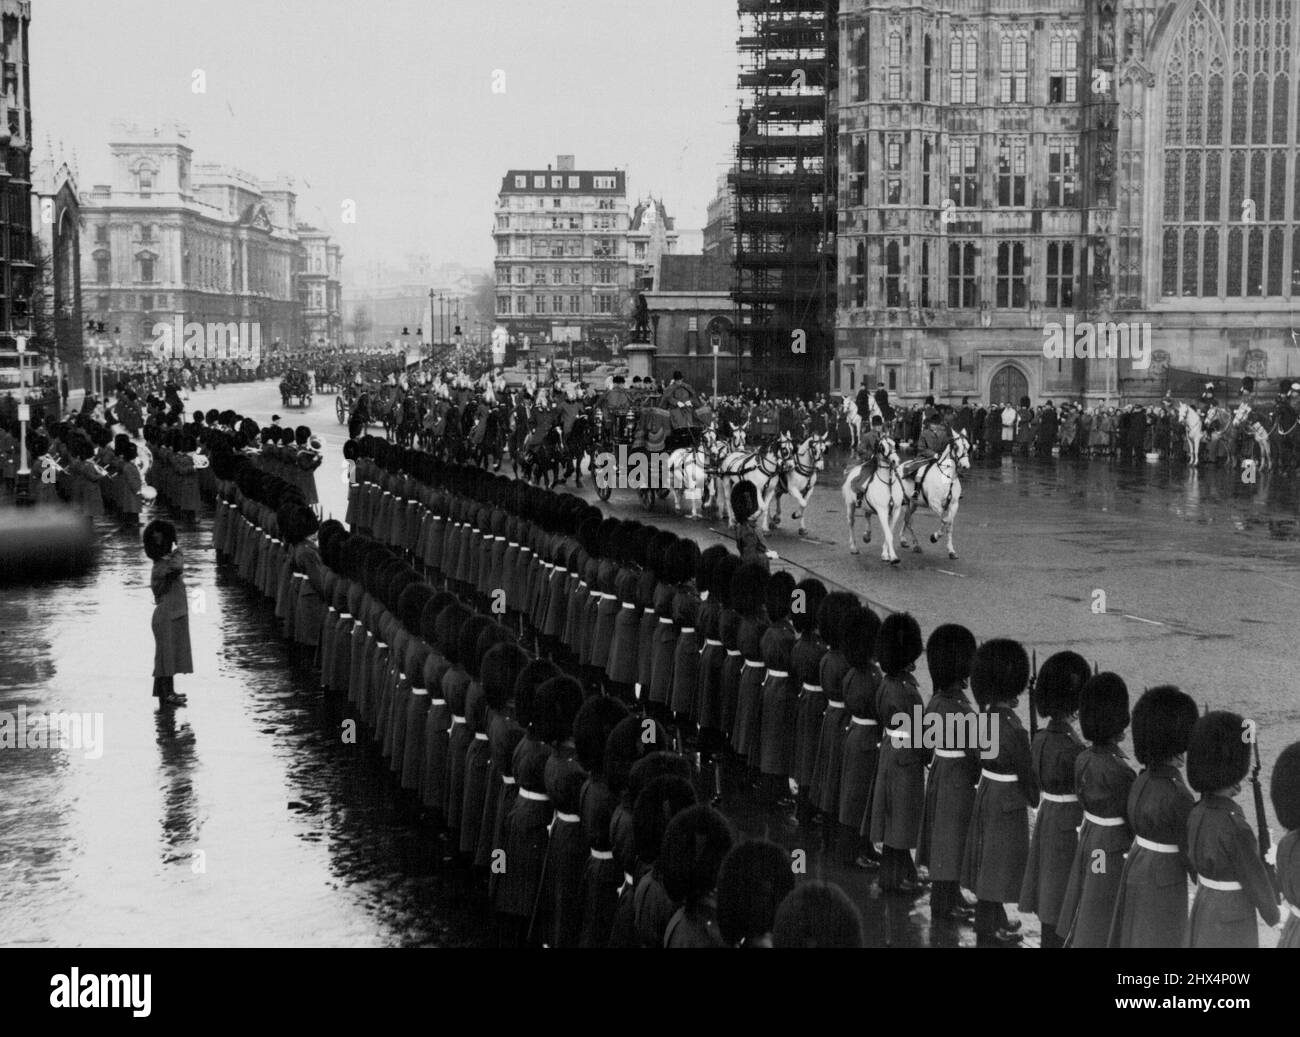 The Queen Approaches The House - The winter sunshine breaks through the clouds as the Queen's landau, with an escort of the Household Cavalry, approaches the Houses of Parliament for the State Opening. November 30, 1954. (Photo by Evening Standard Picture). Stock Photo